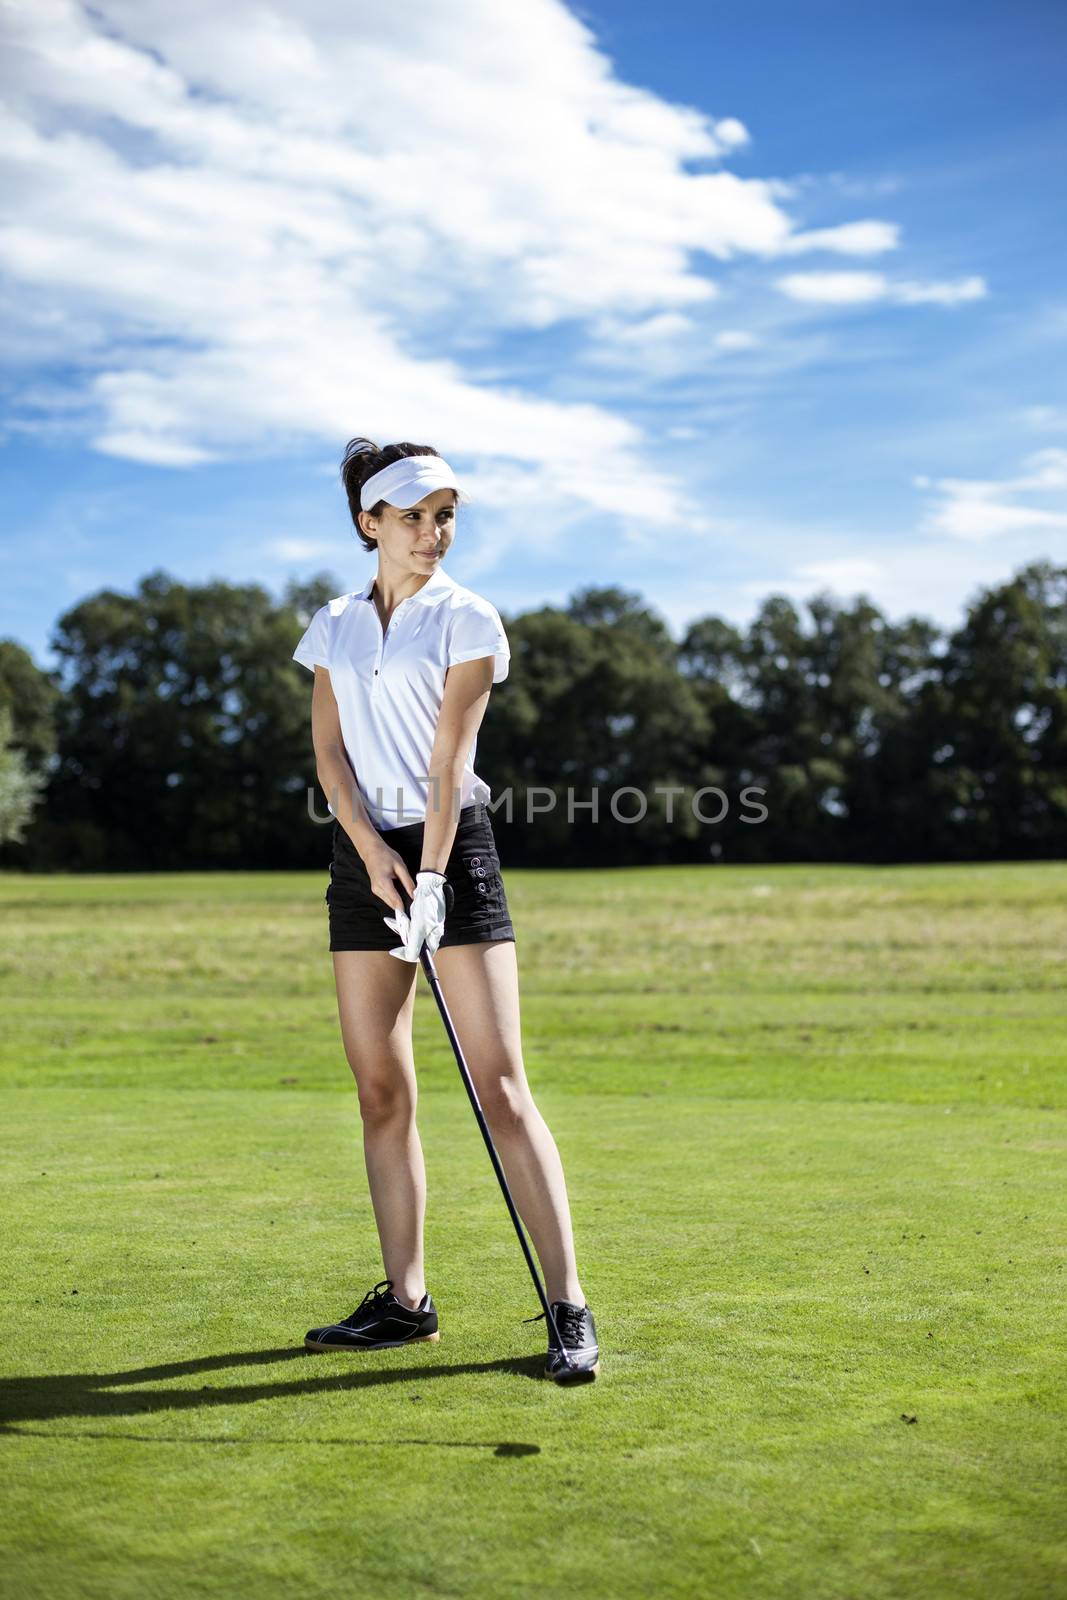 Pretty girl playing golf on grass by fikmik